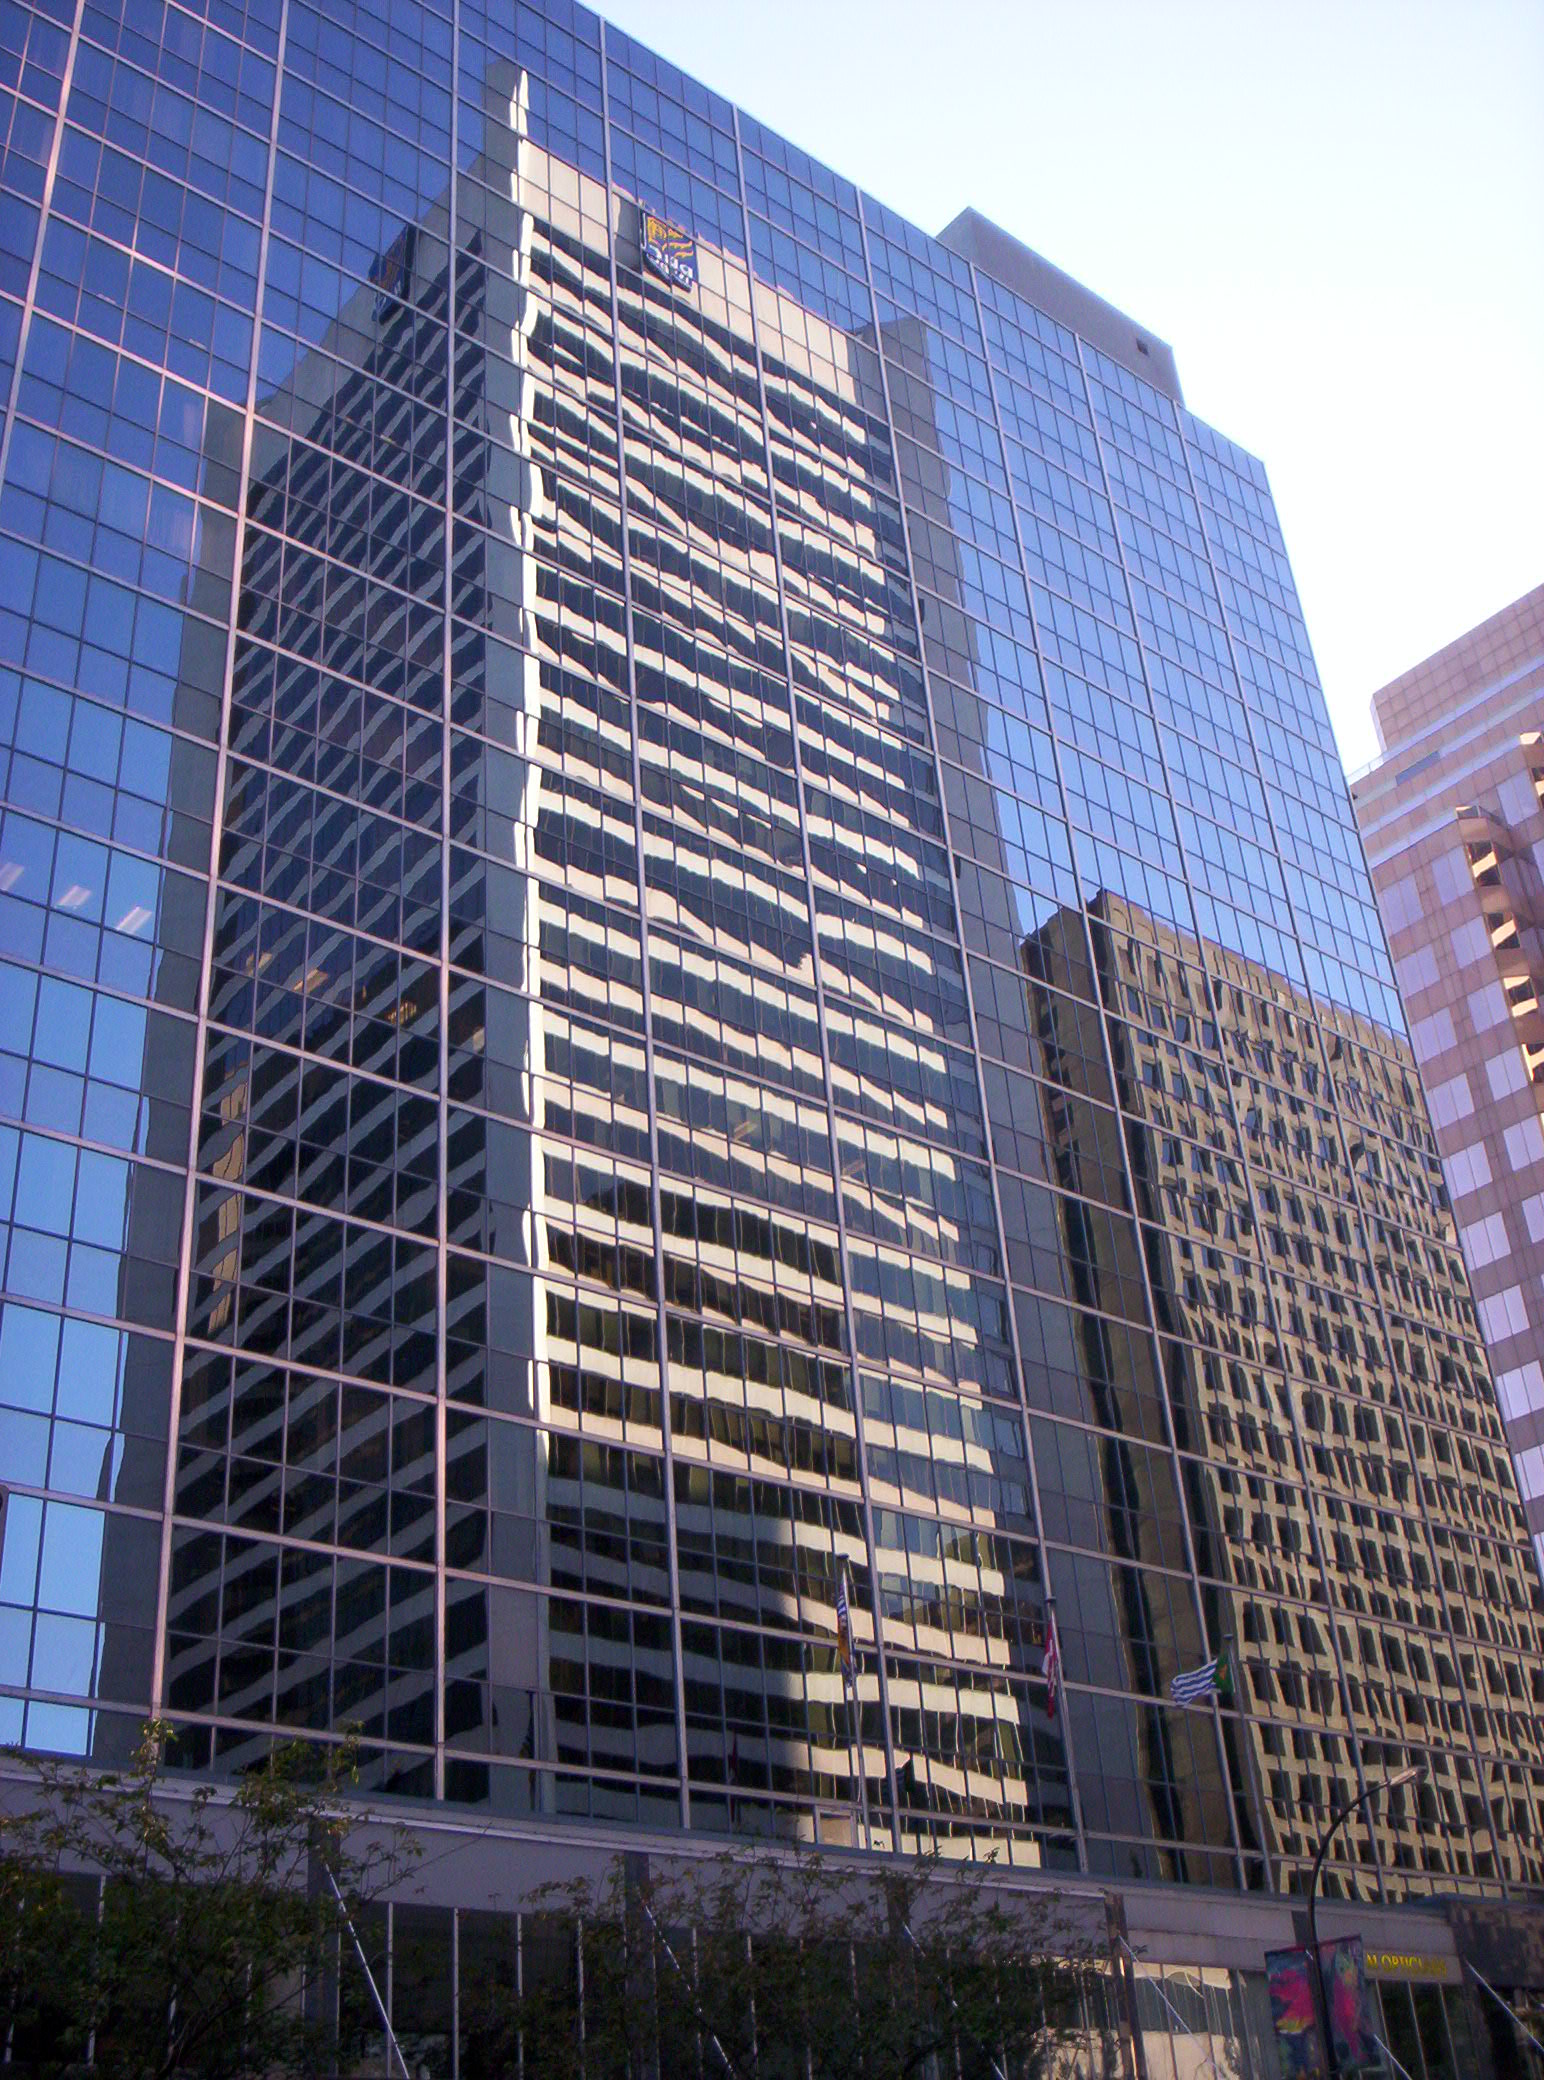 File:Reflection of Vancouver RBC banking plaza on building.jpg ...